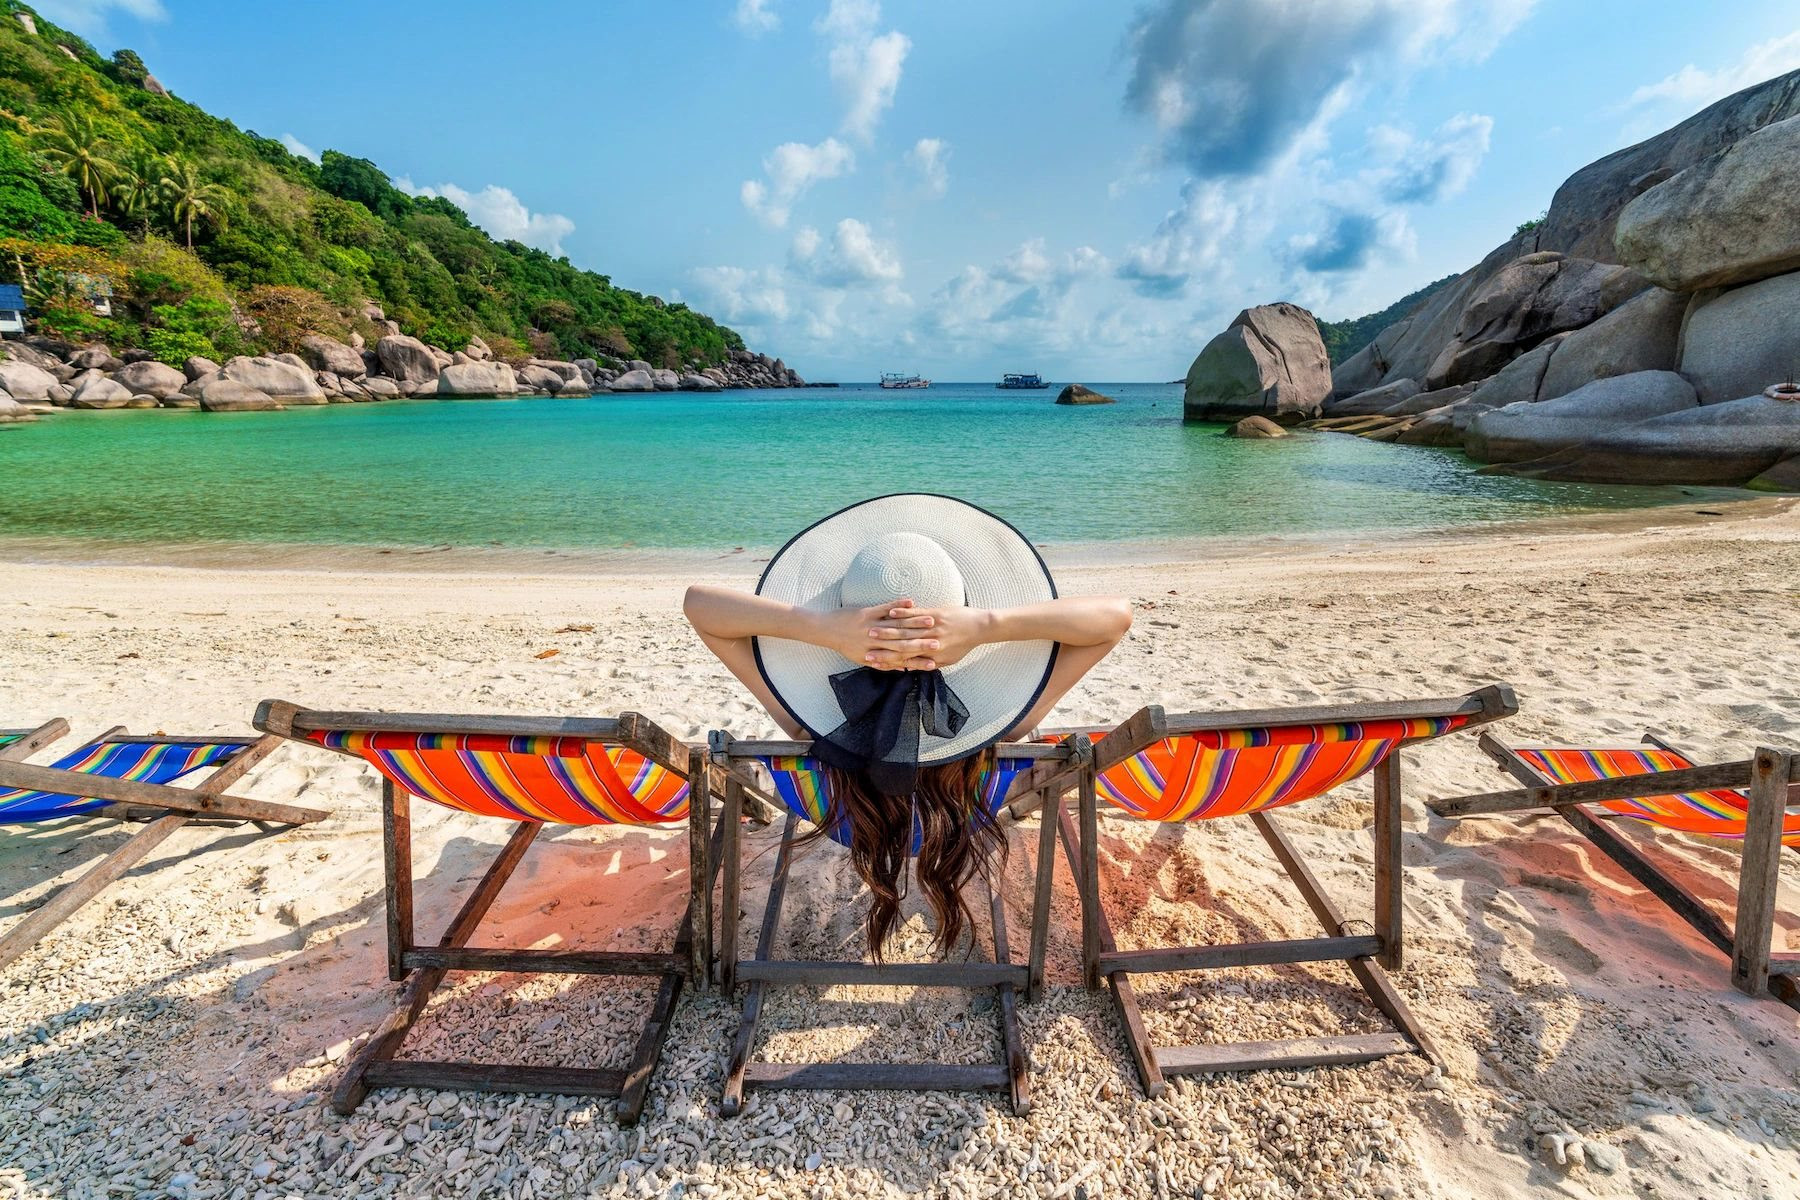 woman-with-hat-sitting-chairs-beach-beautiful-tropical-beach-woman-relaxing-tropical-beach-koh-nangyuan-island_335224-1111-compressed.jpg